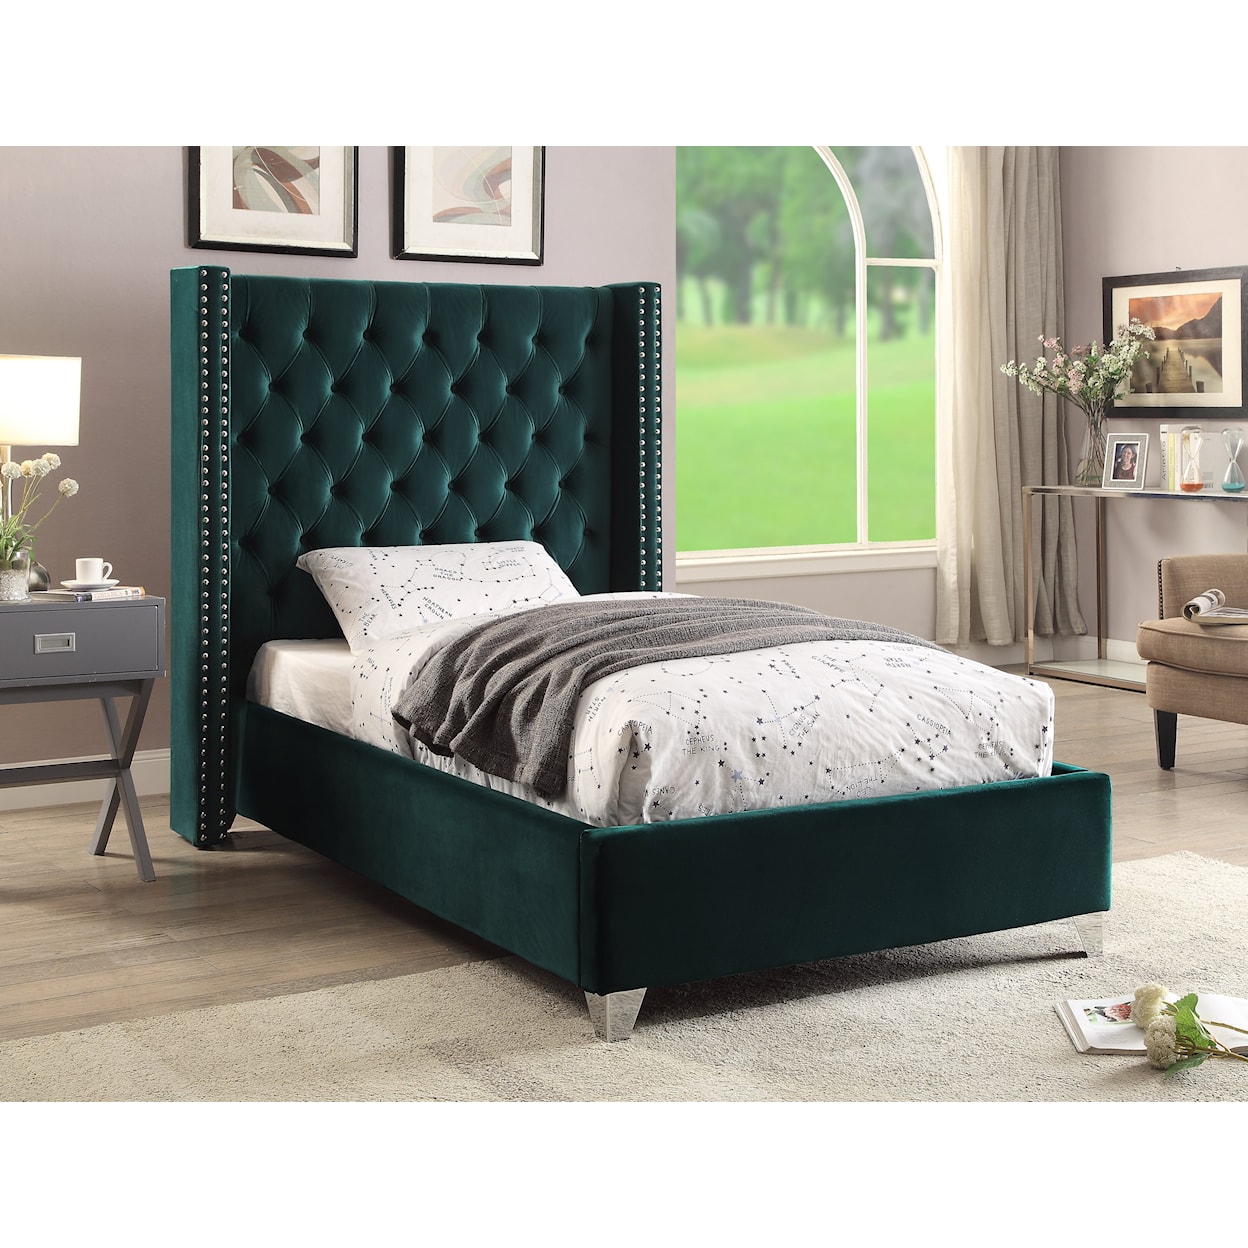 Meridian Furniture Aiden Twin Bed